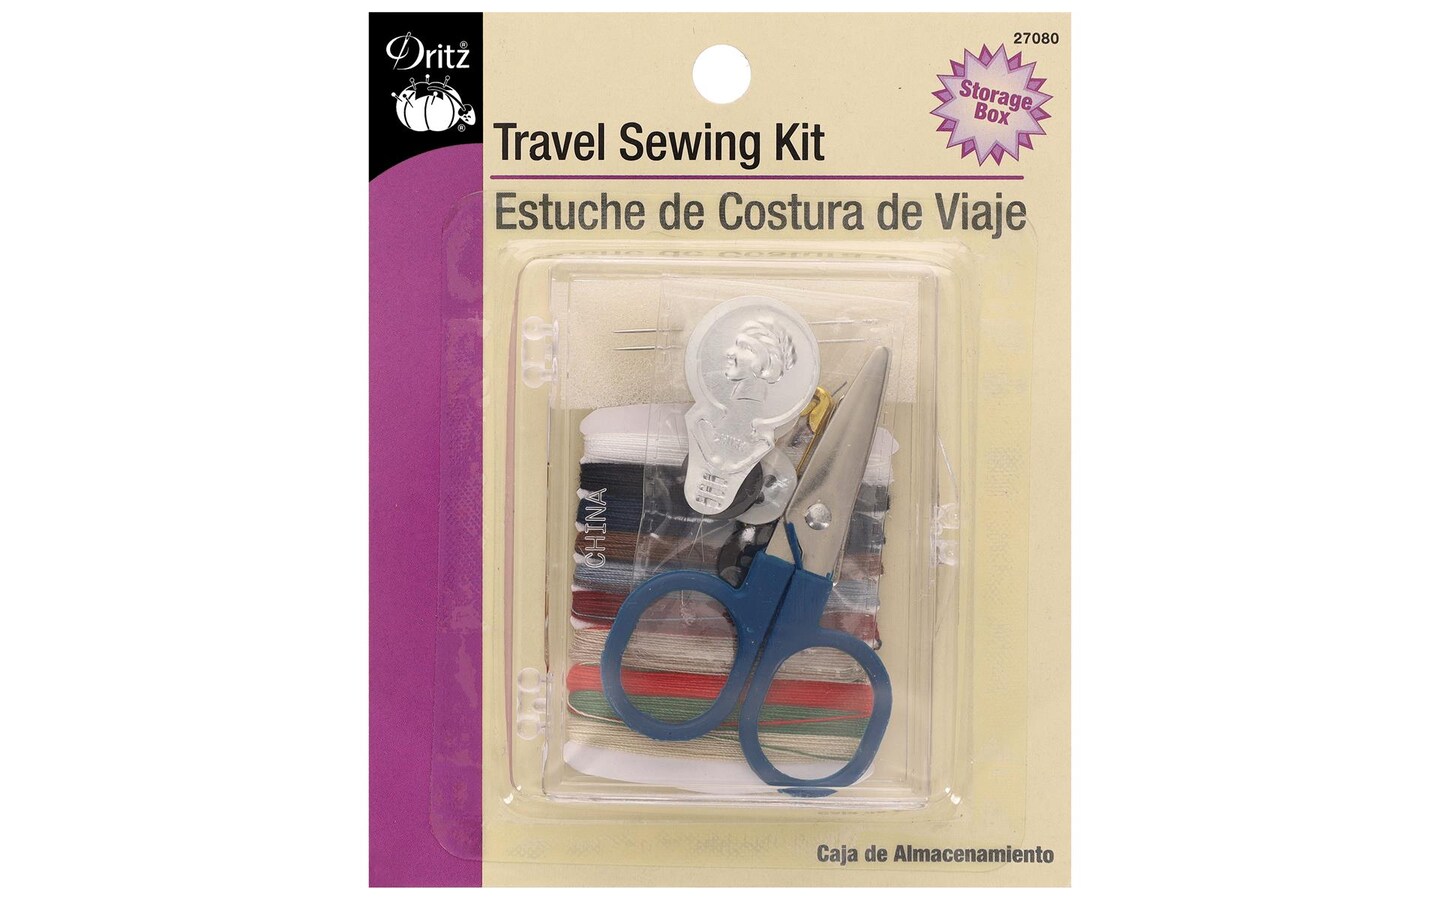 Dritz Travel Sewing Kit with Storage Box